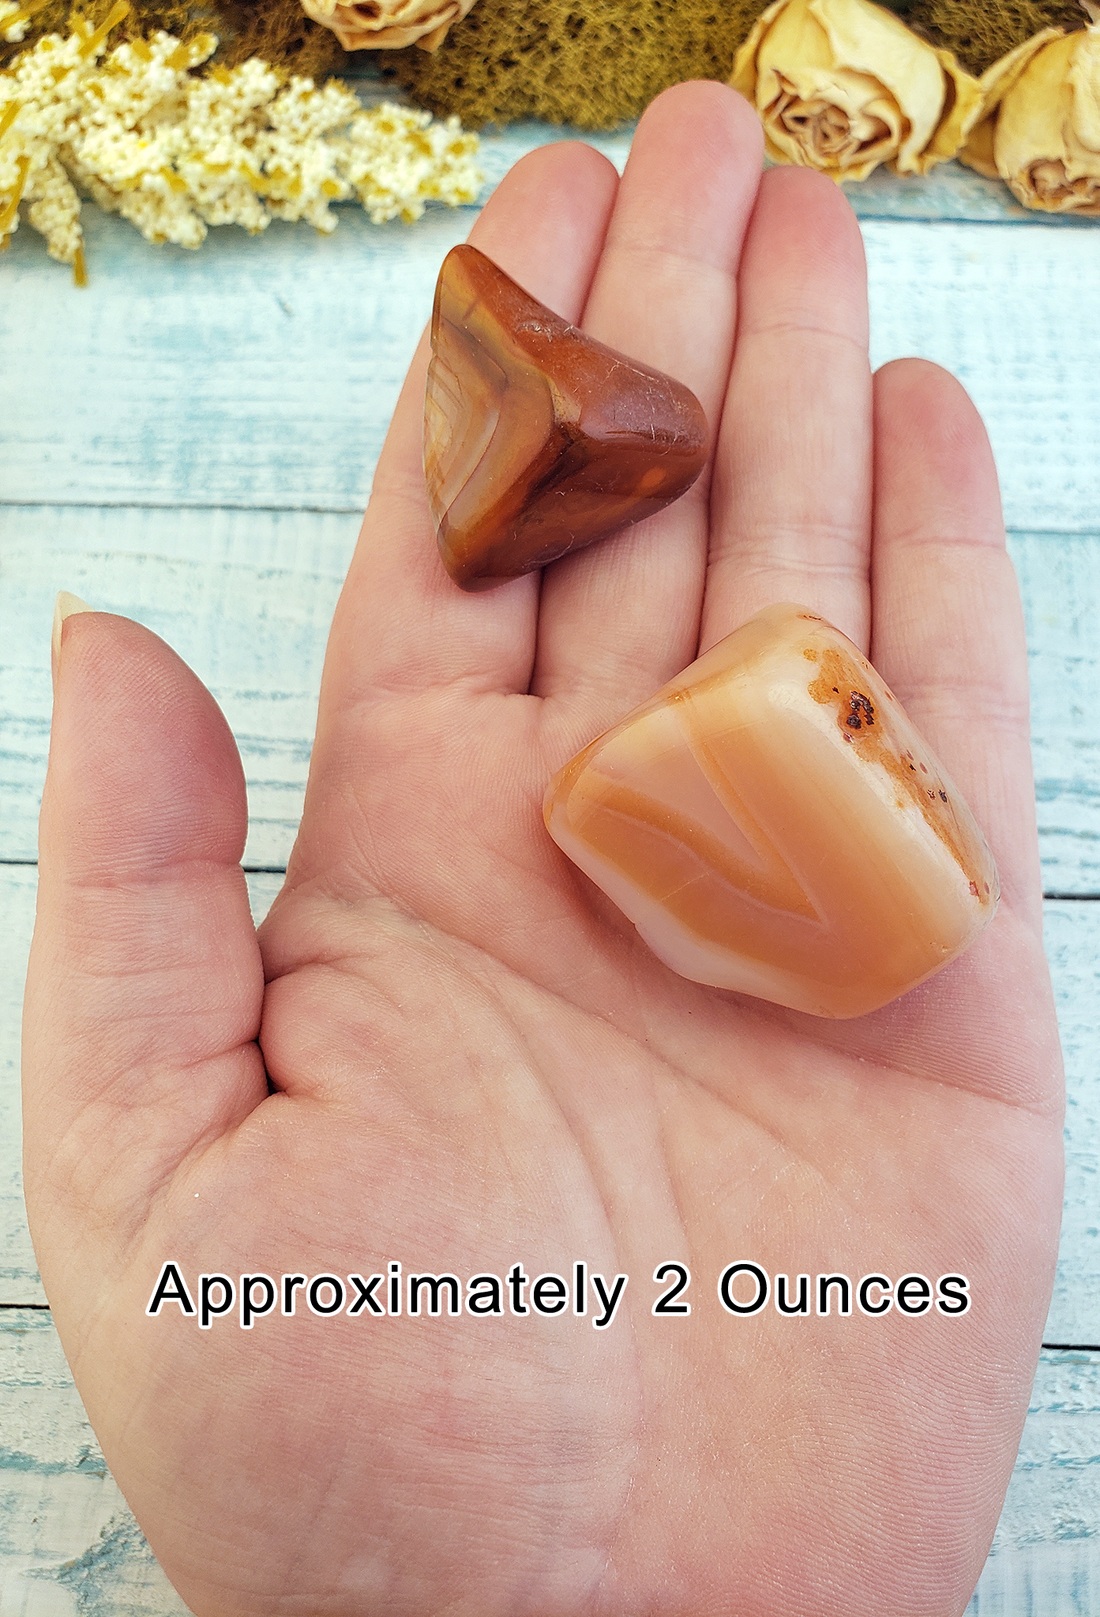 Banded Carnelian Polished Tumbled Gemstone - 2 Ounces in Hand